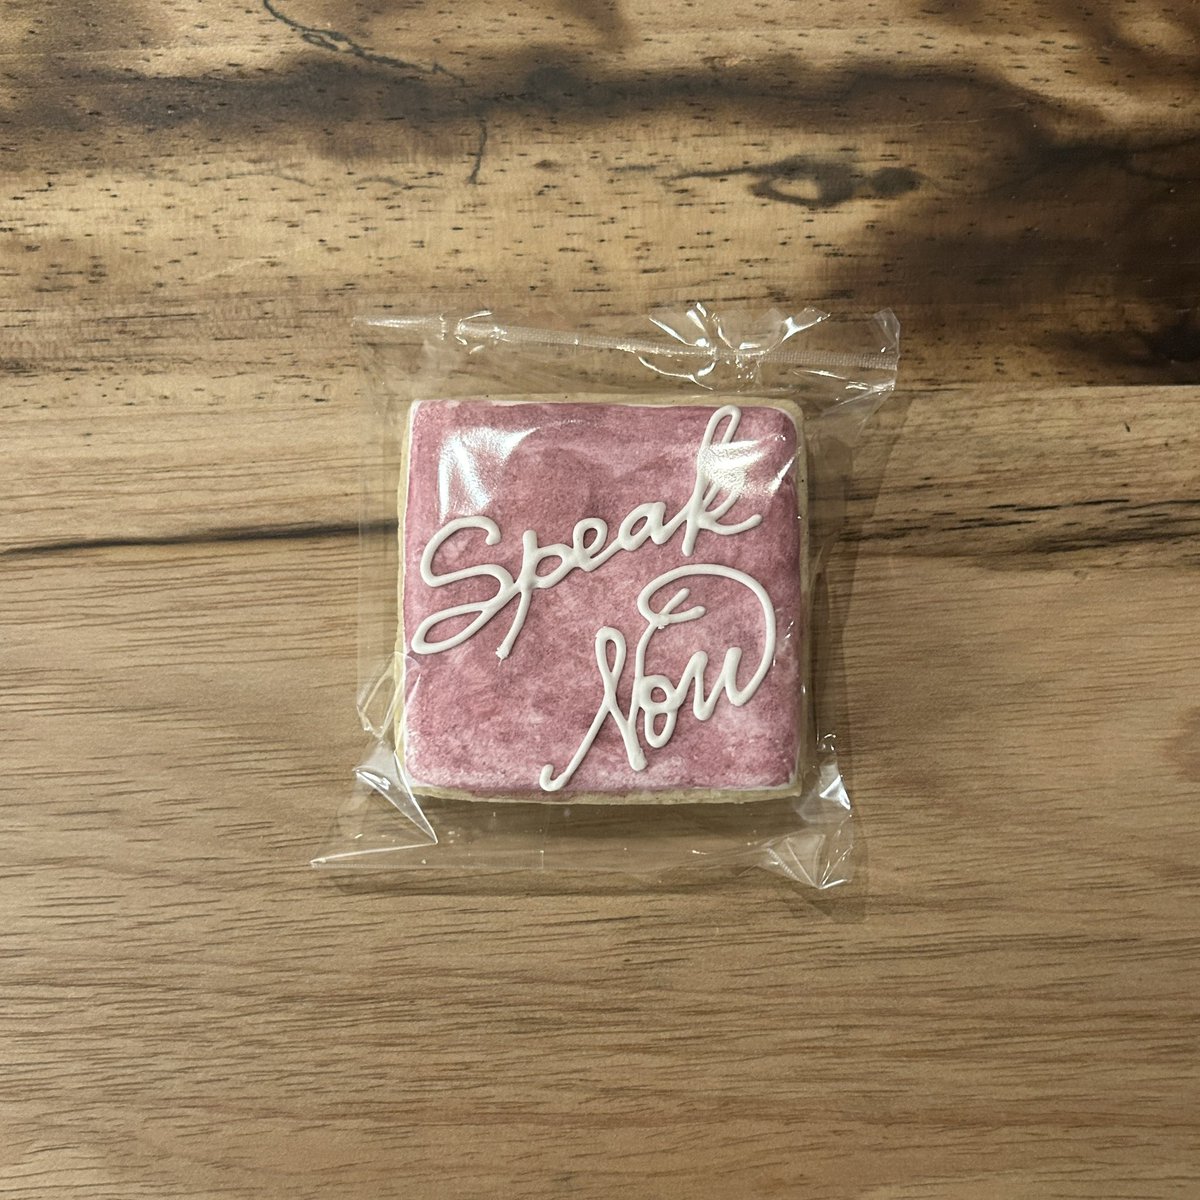 speak now cookie for #THATJuly9th